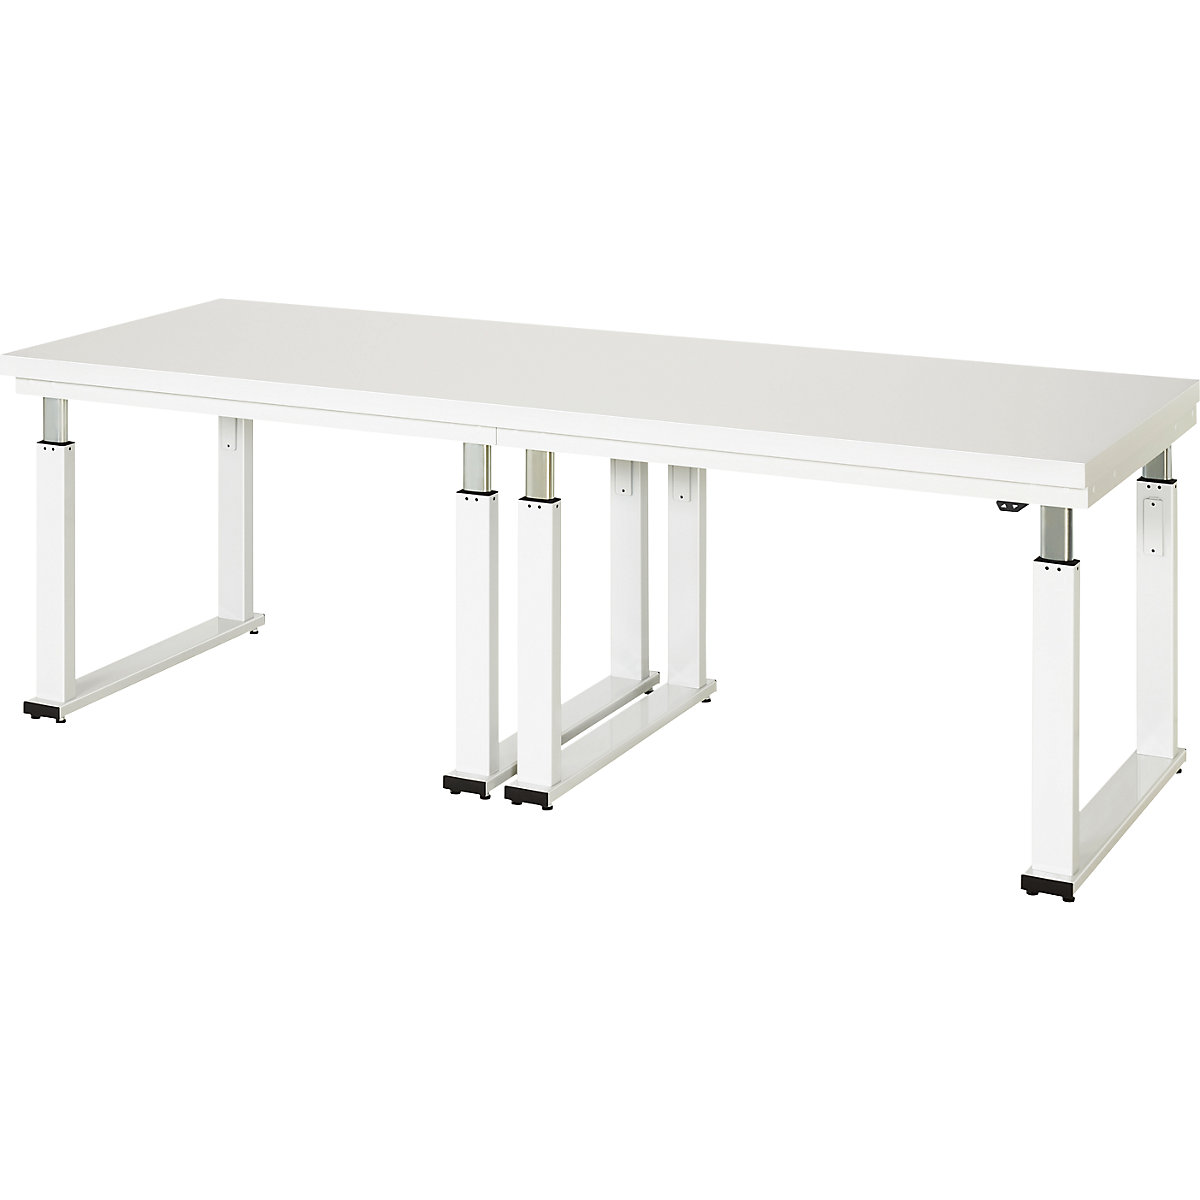 Work table, electric height adjustment – RAU, hardened laminate worktop, max. load 600 kg, WxD 2500 x 900 mm-8